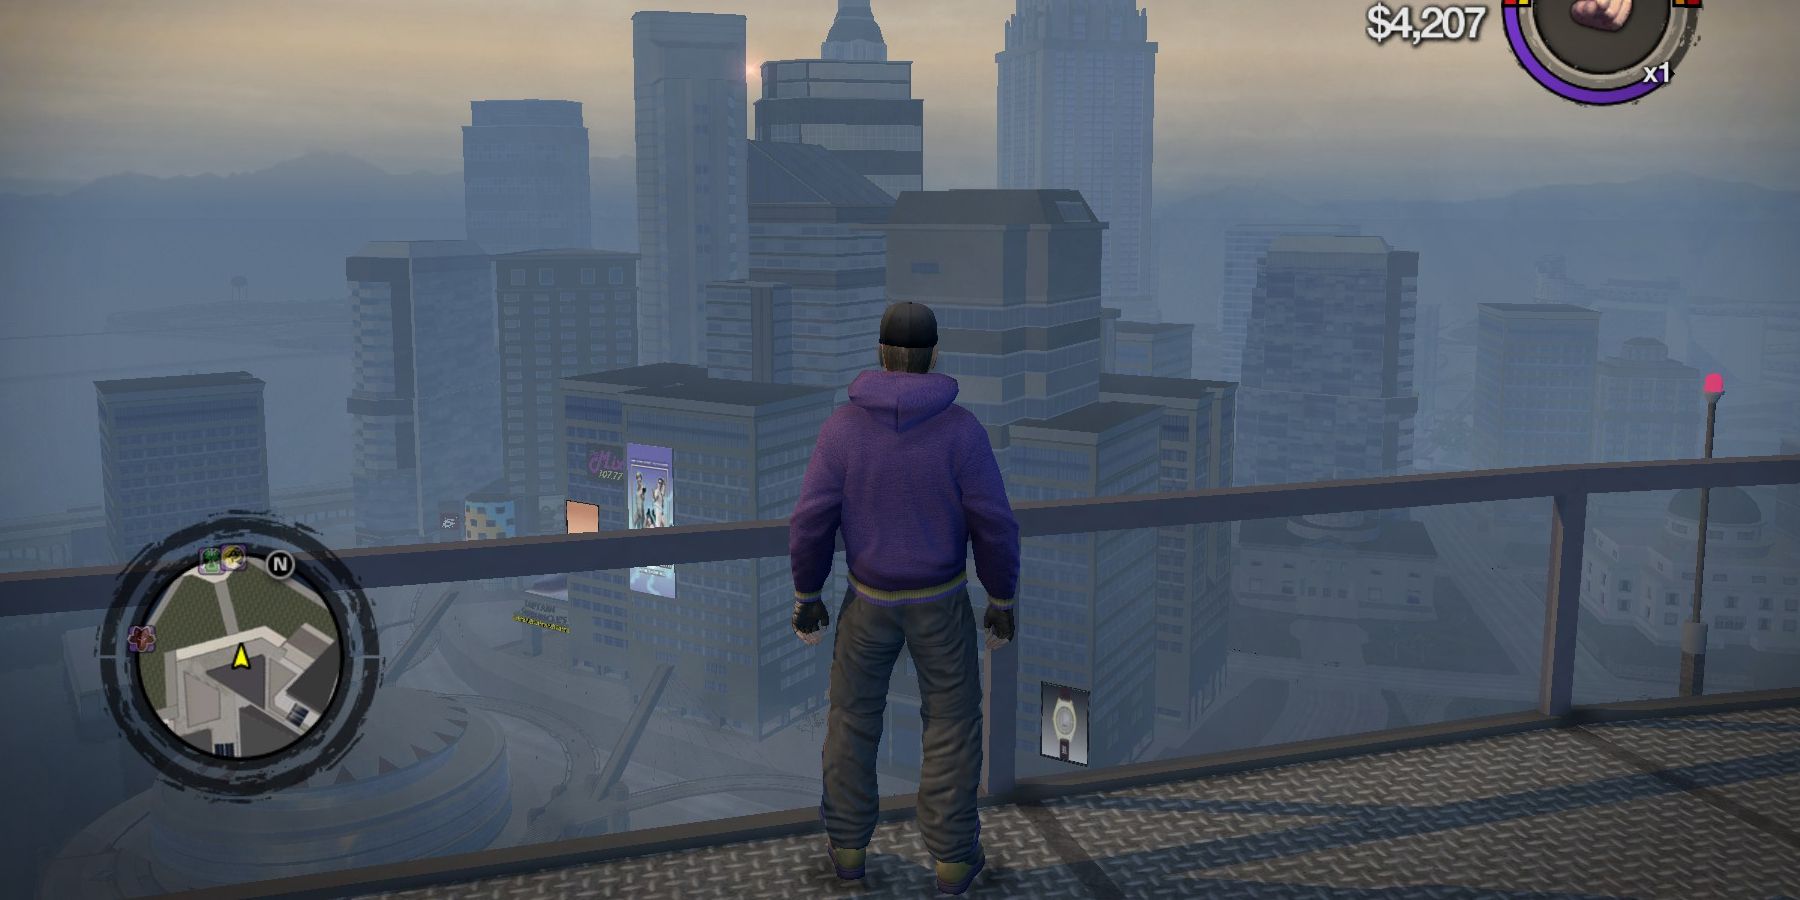 The player character facing the city of Stilwater in Saints Row 2